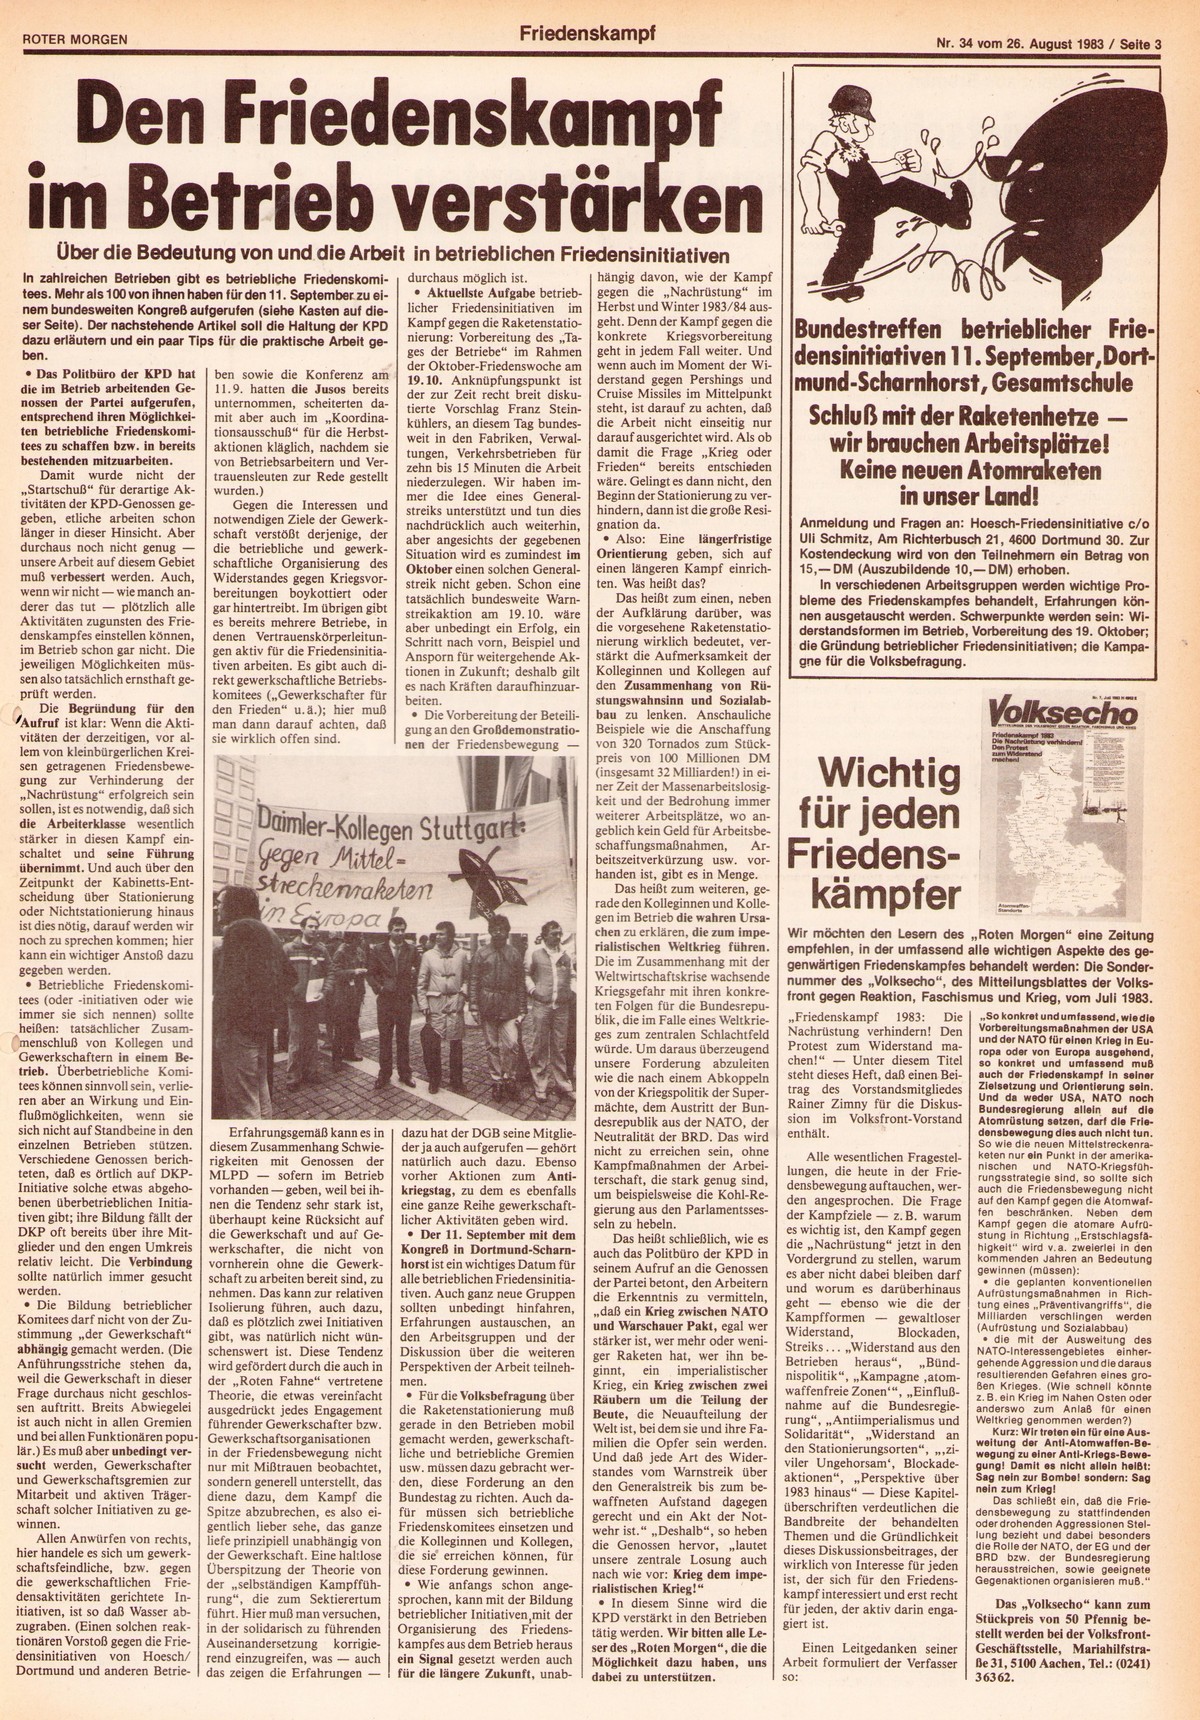 Roter Morgen, 17. Jg., 26. August 1983, Nr. 34, Seite 3